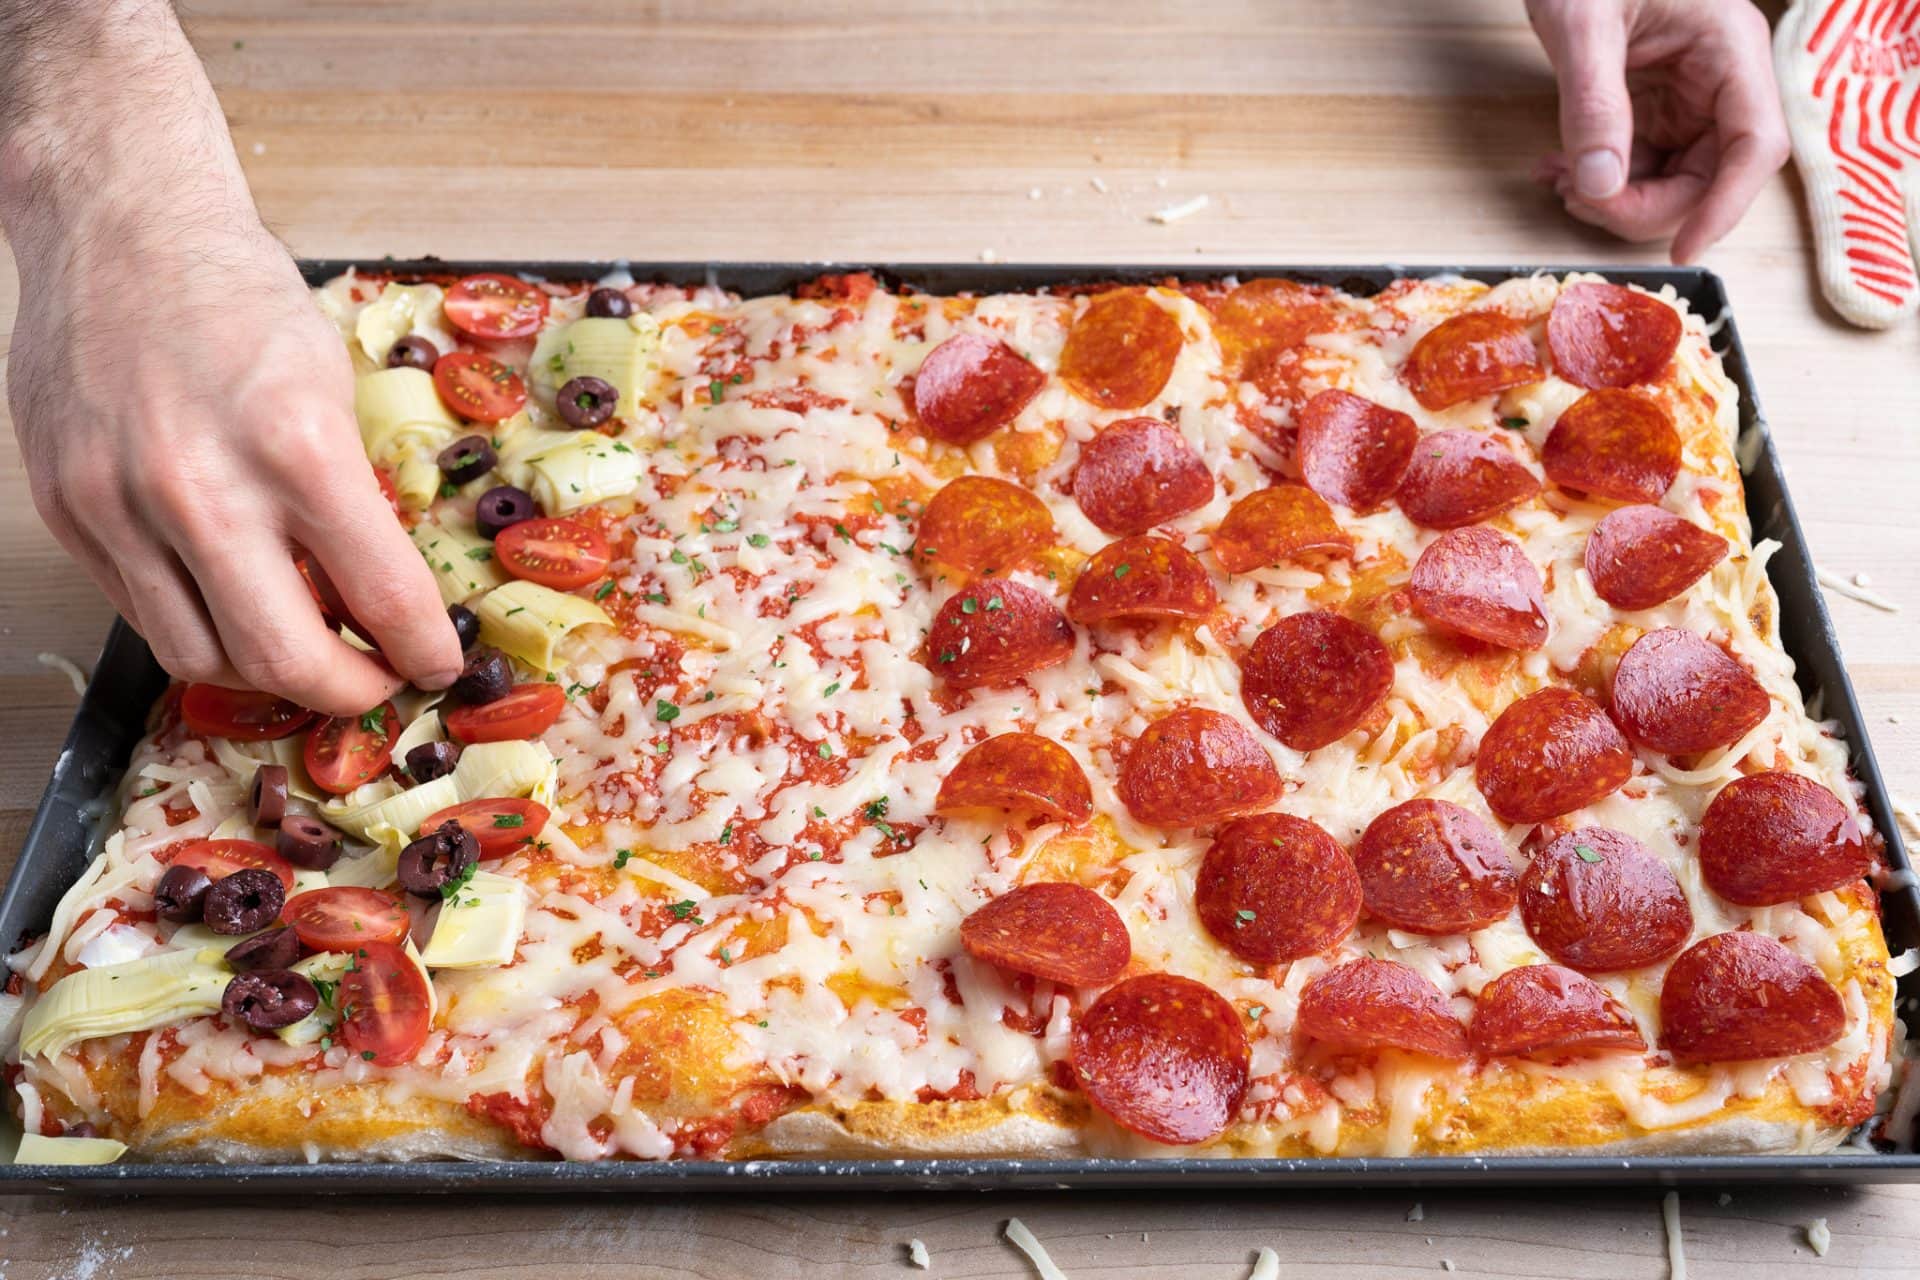 Place toppings on parbaked pizza dough